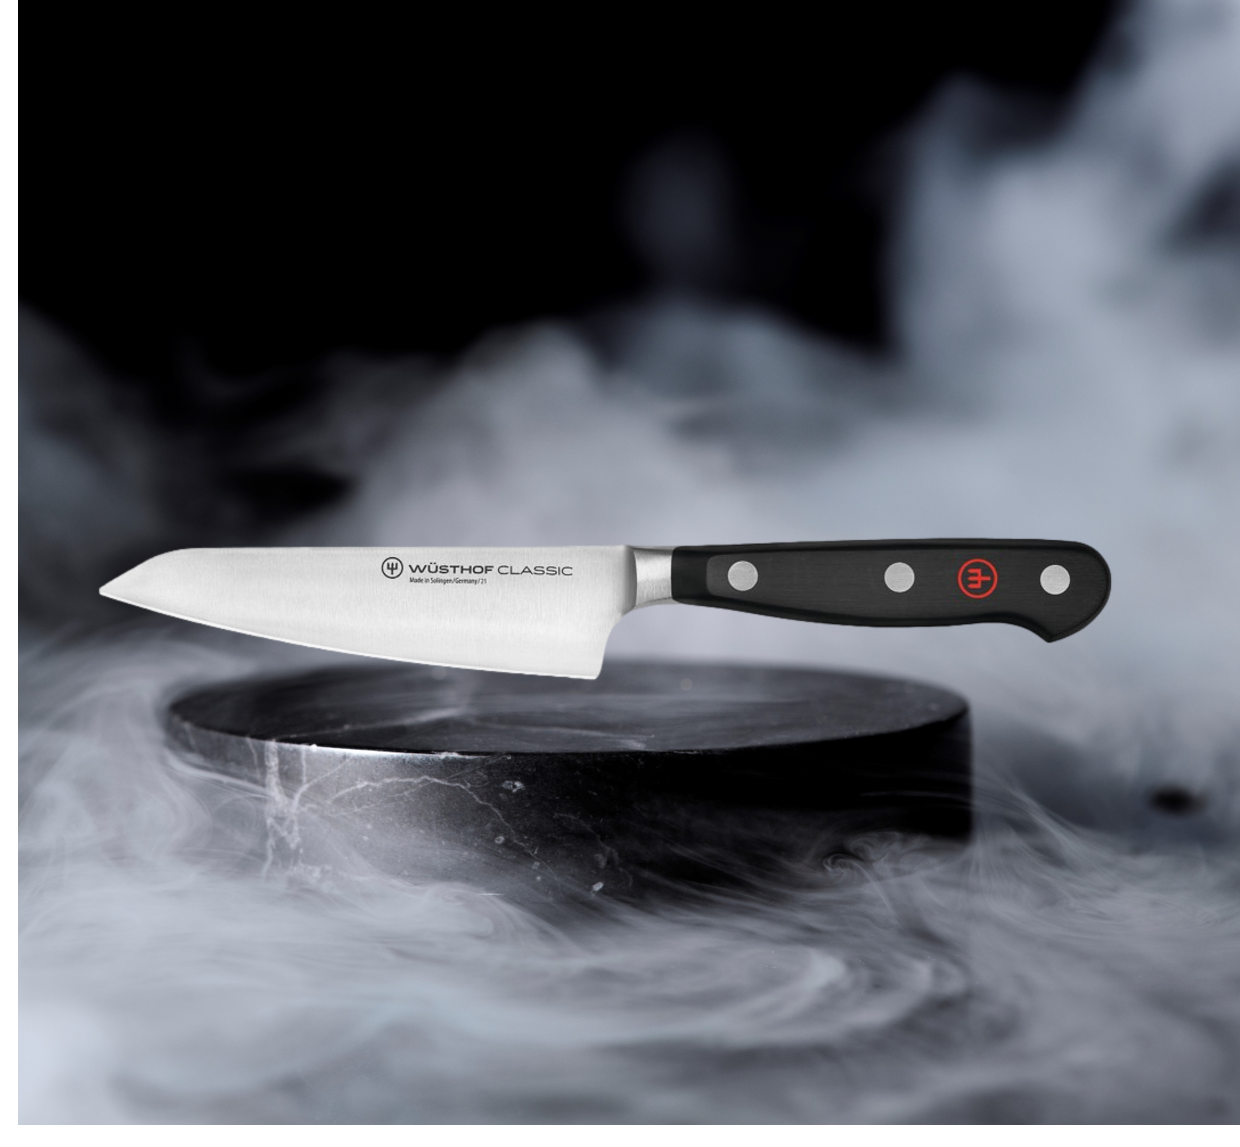 Scanpan  The Cotswold Knife Company